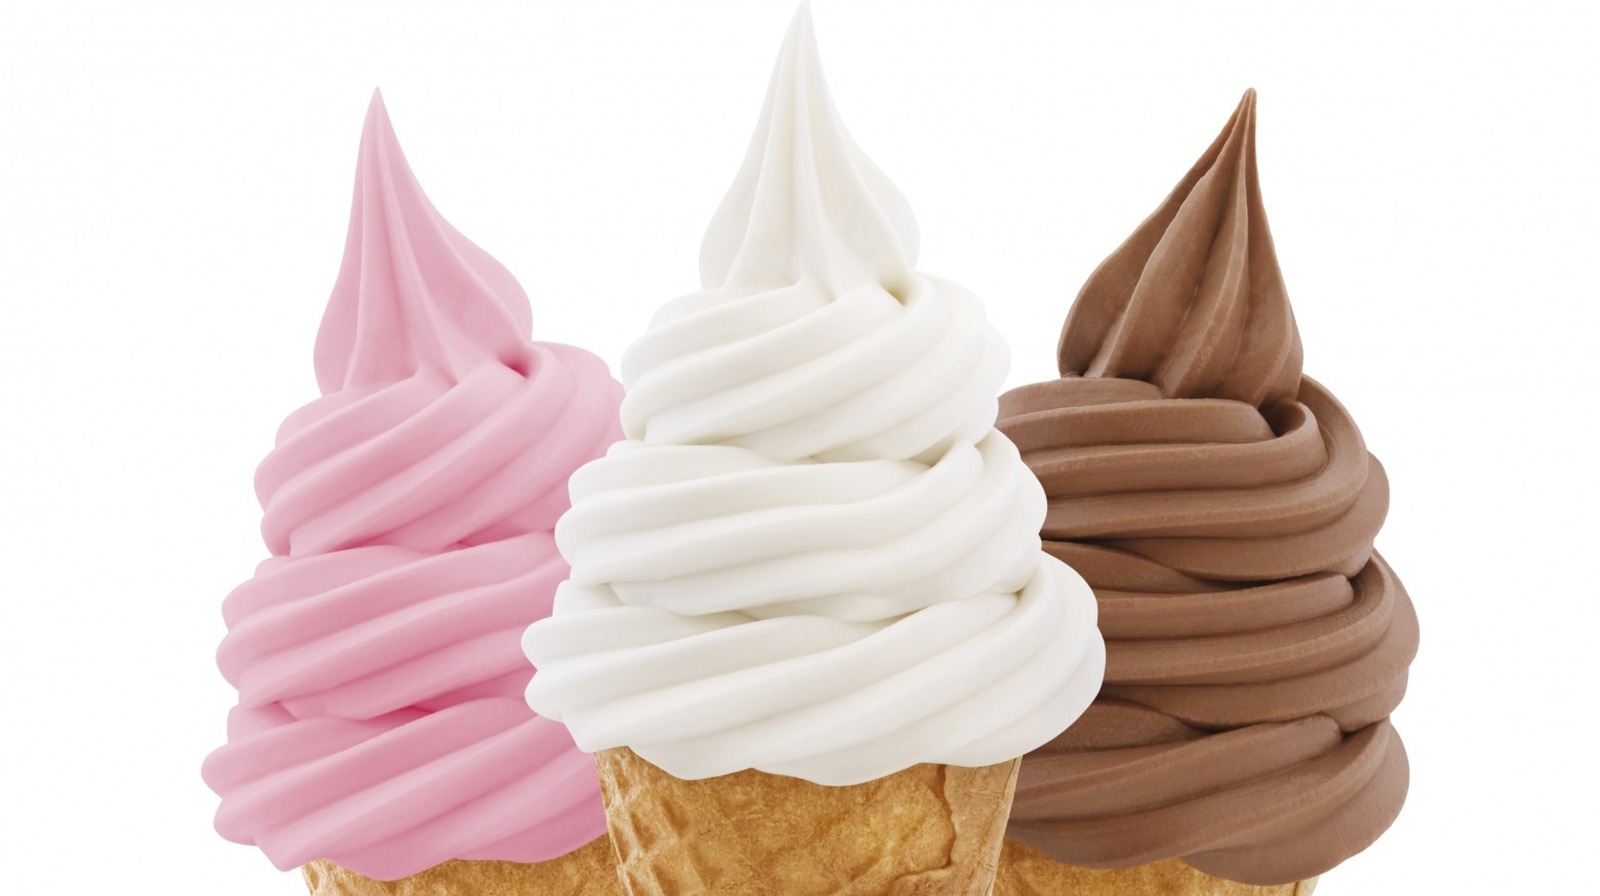 https://www.mashed.com/img/gallery/turn-your-hard-ice-cream-into-soft-serve-with-a-simple-hack/l-intro-1697580522.jpg